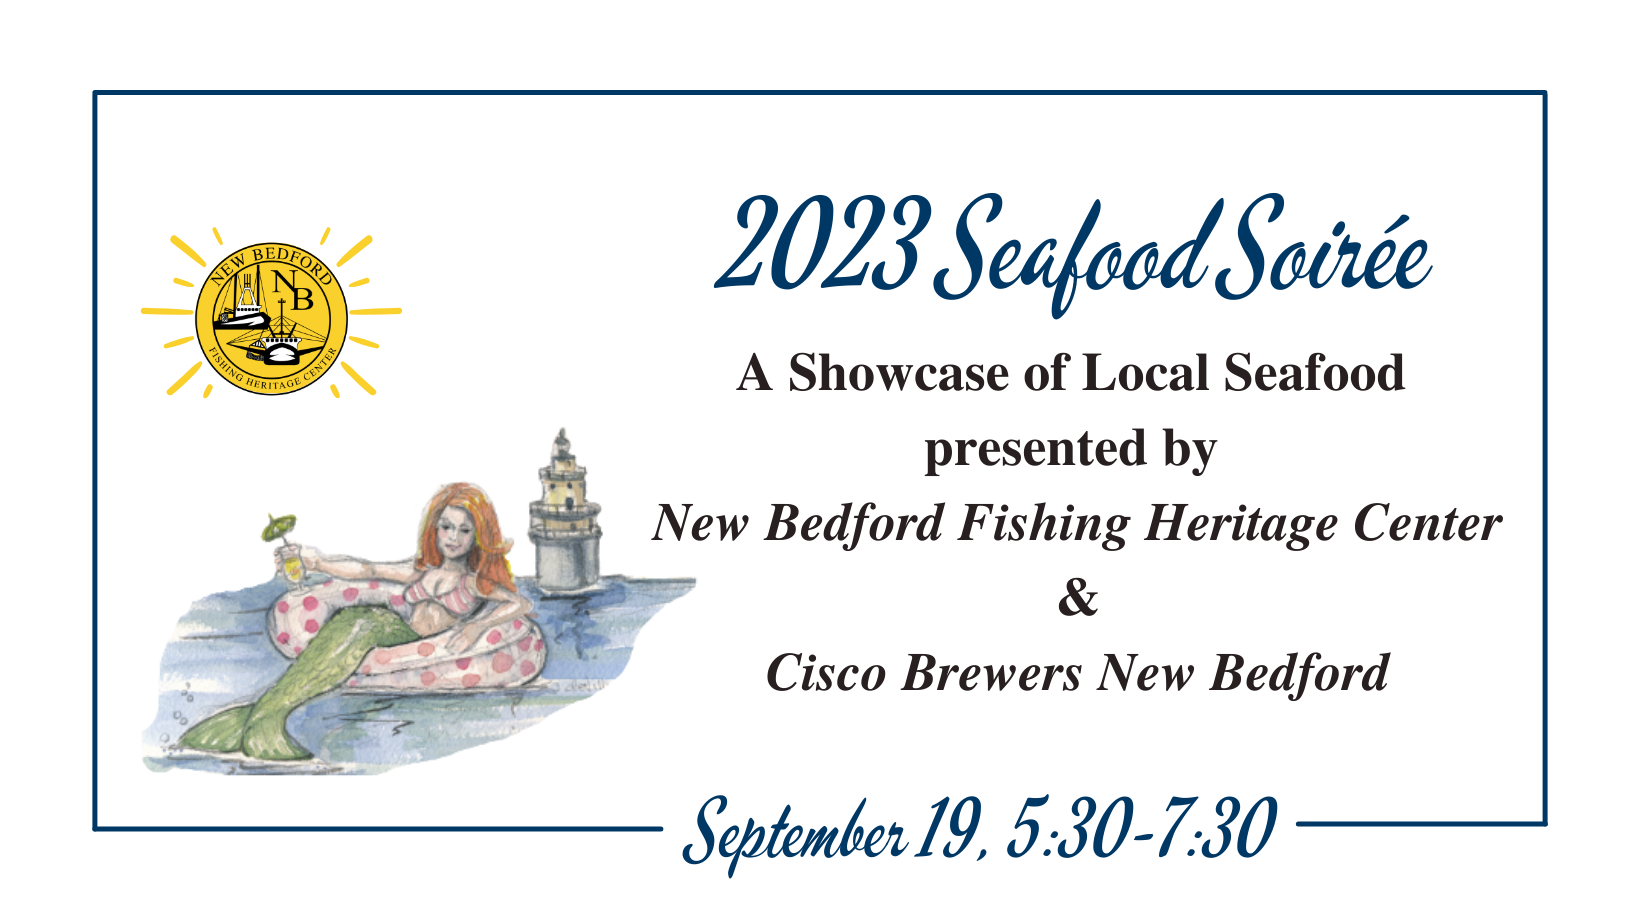 Seafood Soirée 2023 @ Cisco Brewers New Bedford